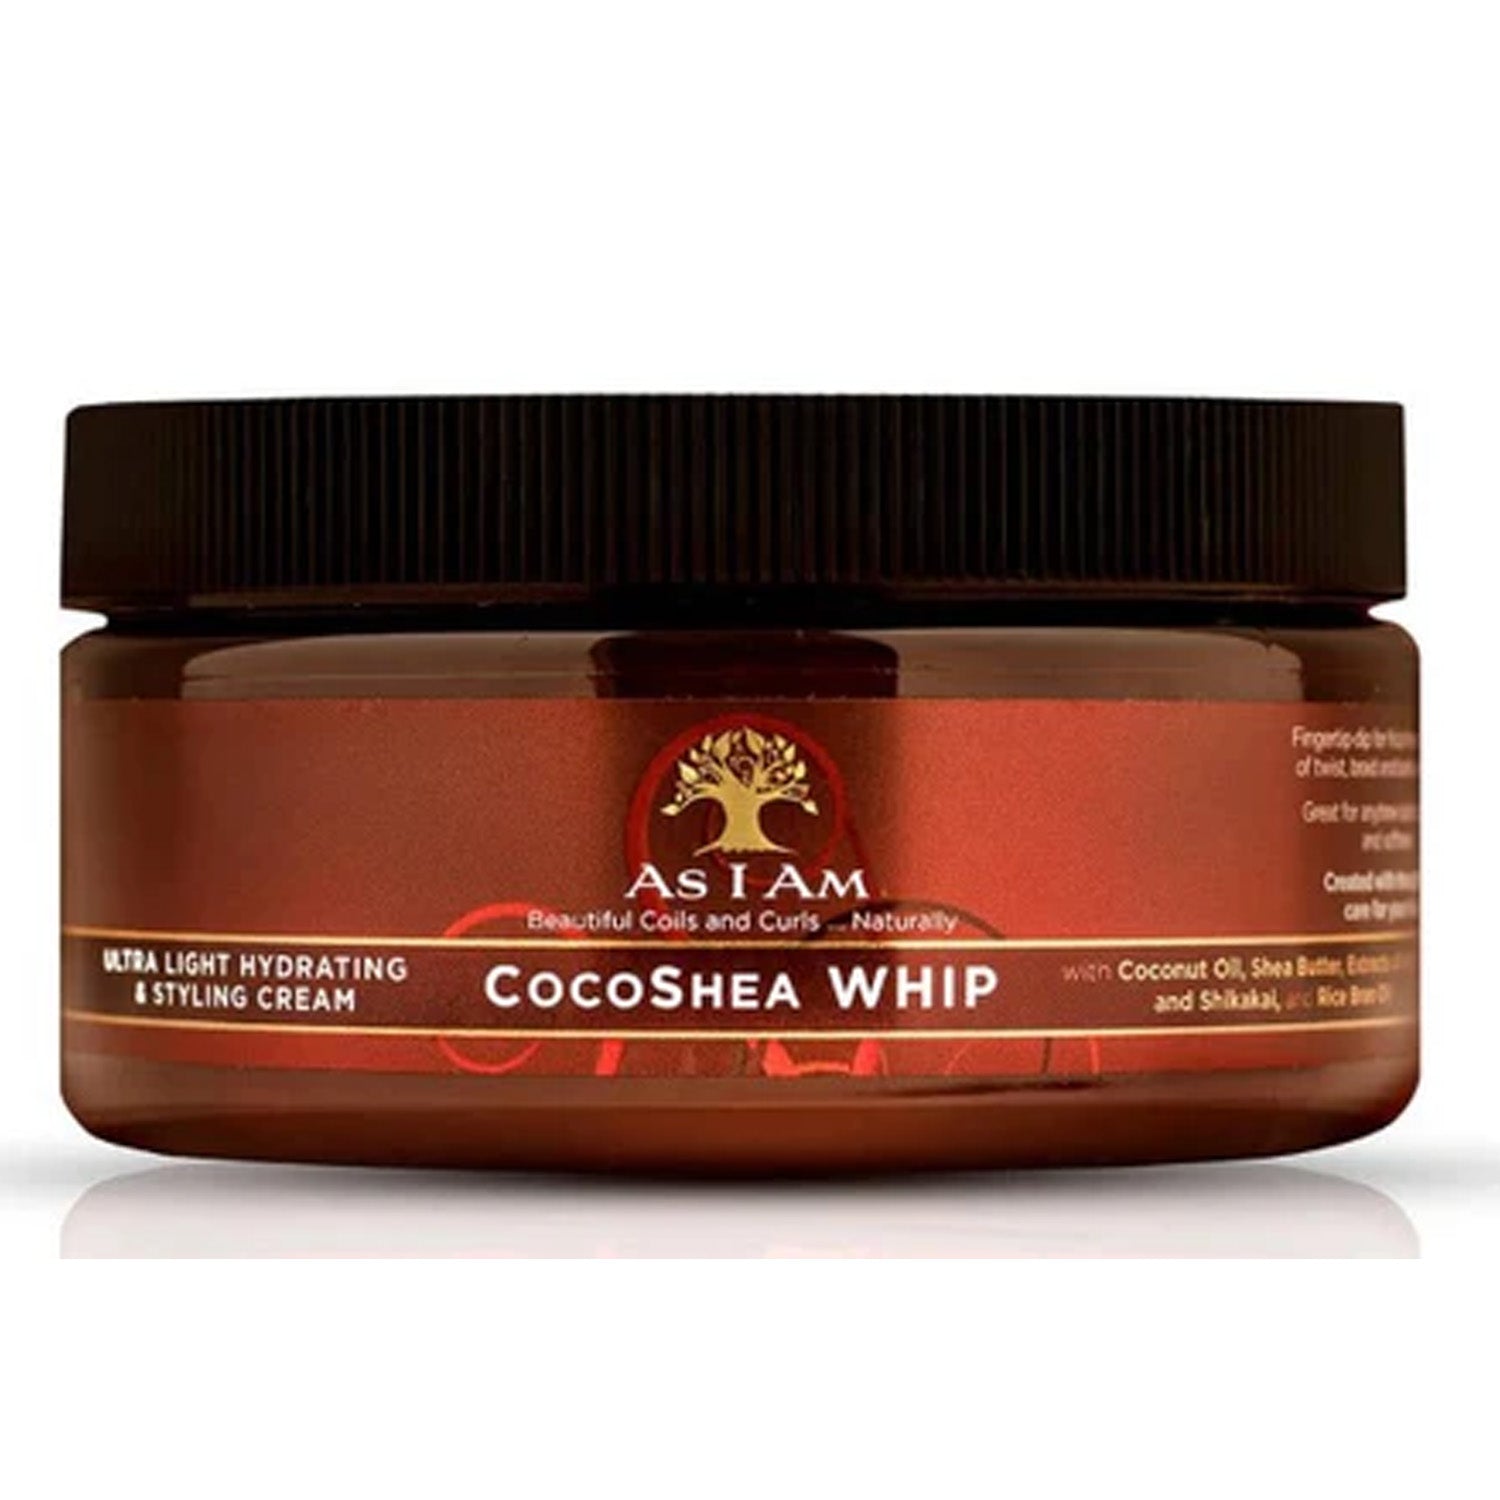 As I Am Naturally CocoShea Whip Styling Cream 8 oz